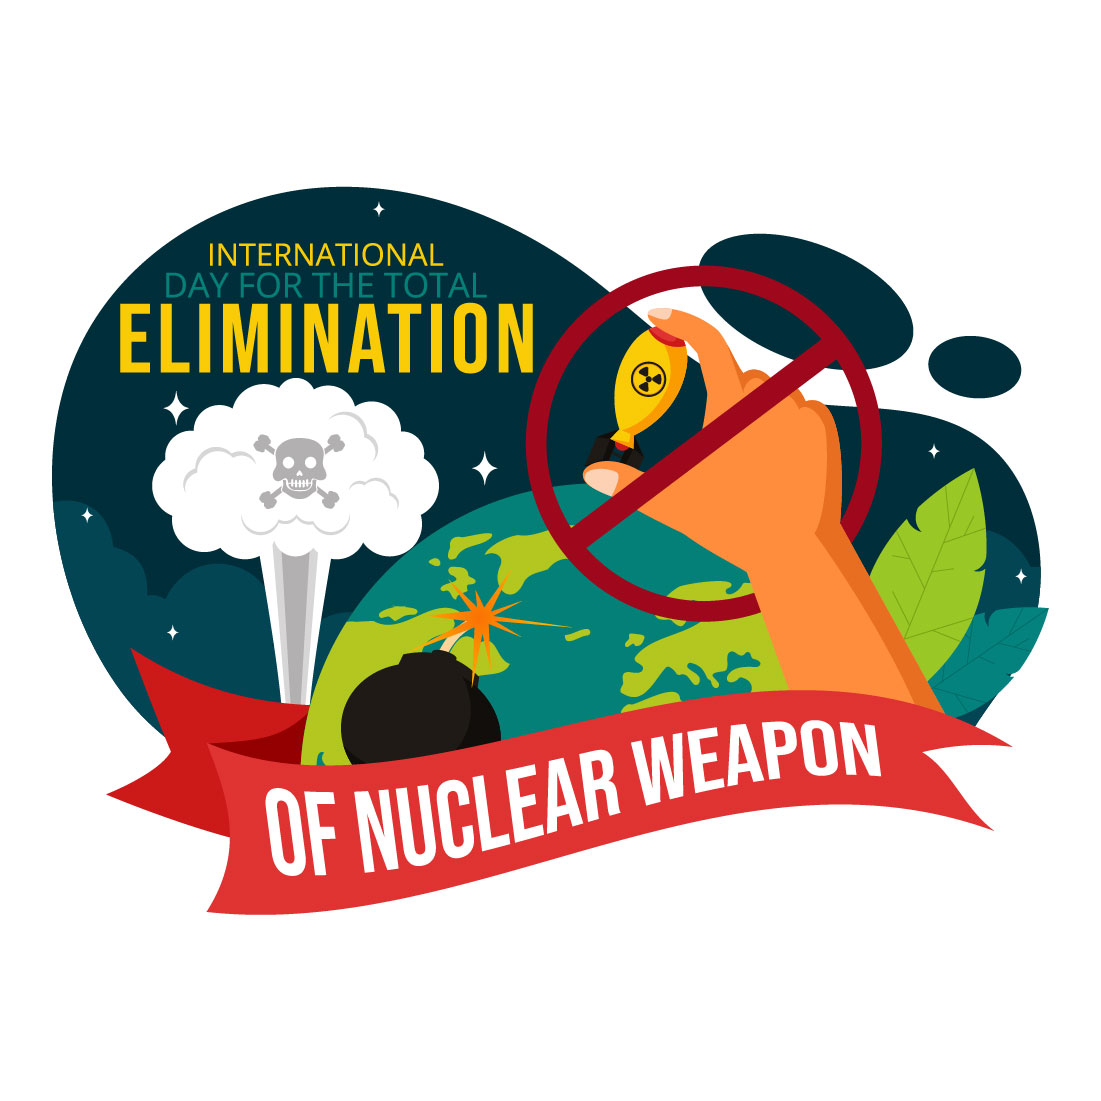 10 Day for the Elimination of Nuclear Weapon Illustration preview image.